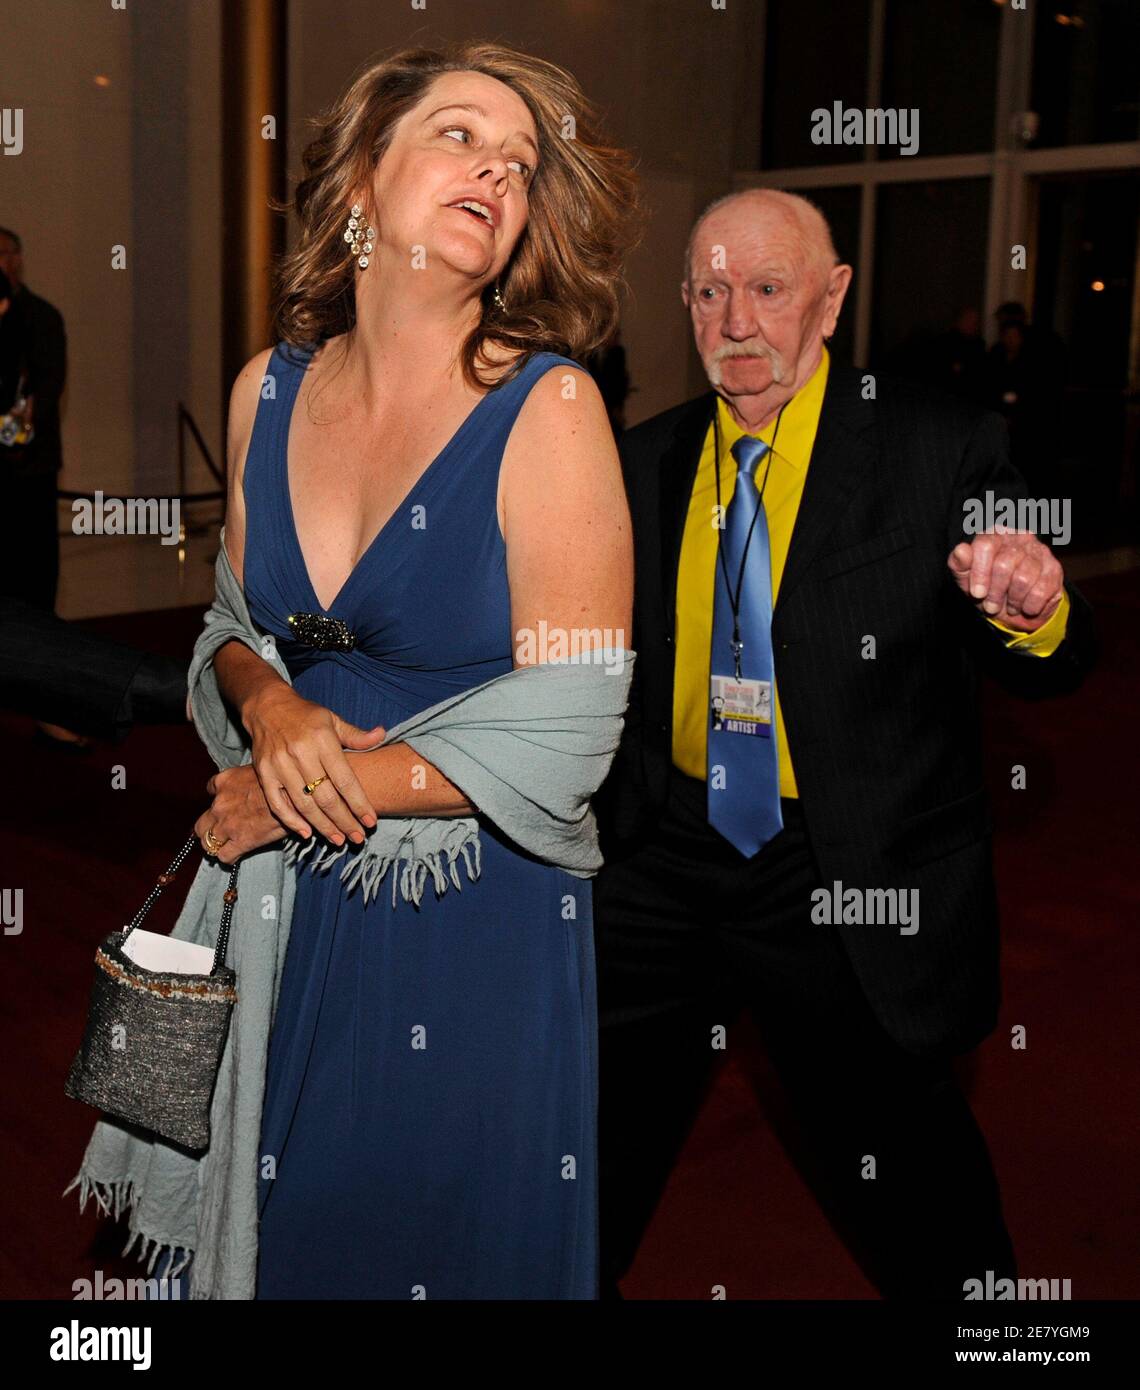 Kelly Carlin-McCall (L), daughter of late stand-up comedian George Carlin, and Patrick Carlin, George's elder brother, arrive for the Kennedy Center's Mark Twain Prize for American Humor Gala in Washington November 10, 2008.  The Prize was awarded to George Carlin.   REUTERS/Mike Theiler (UNITED STATES) Stock Photo